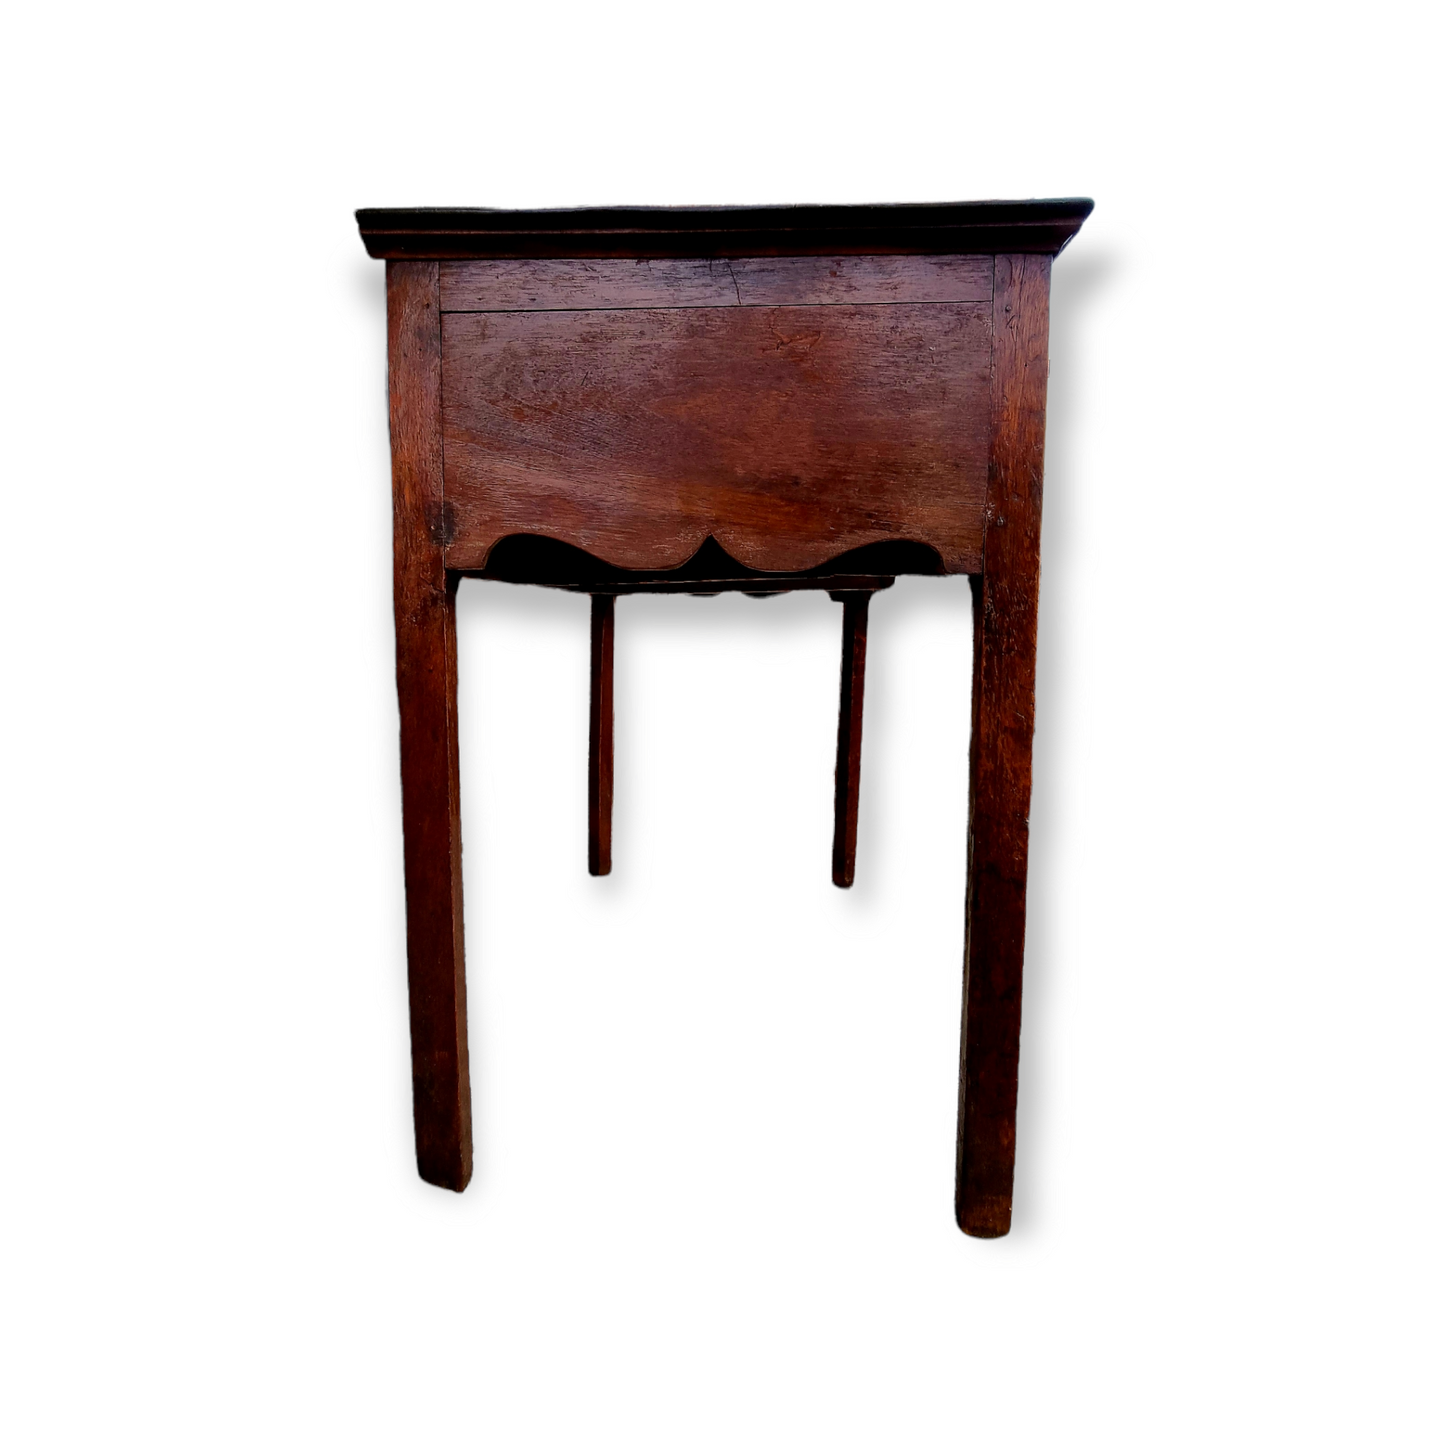 Late 18th Century English Antique Walnut Low Boy or Side Table